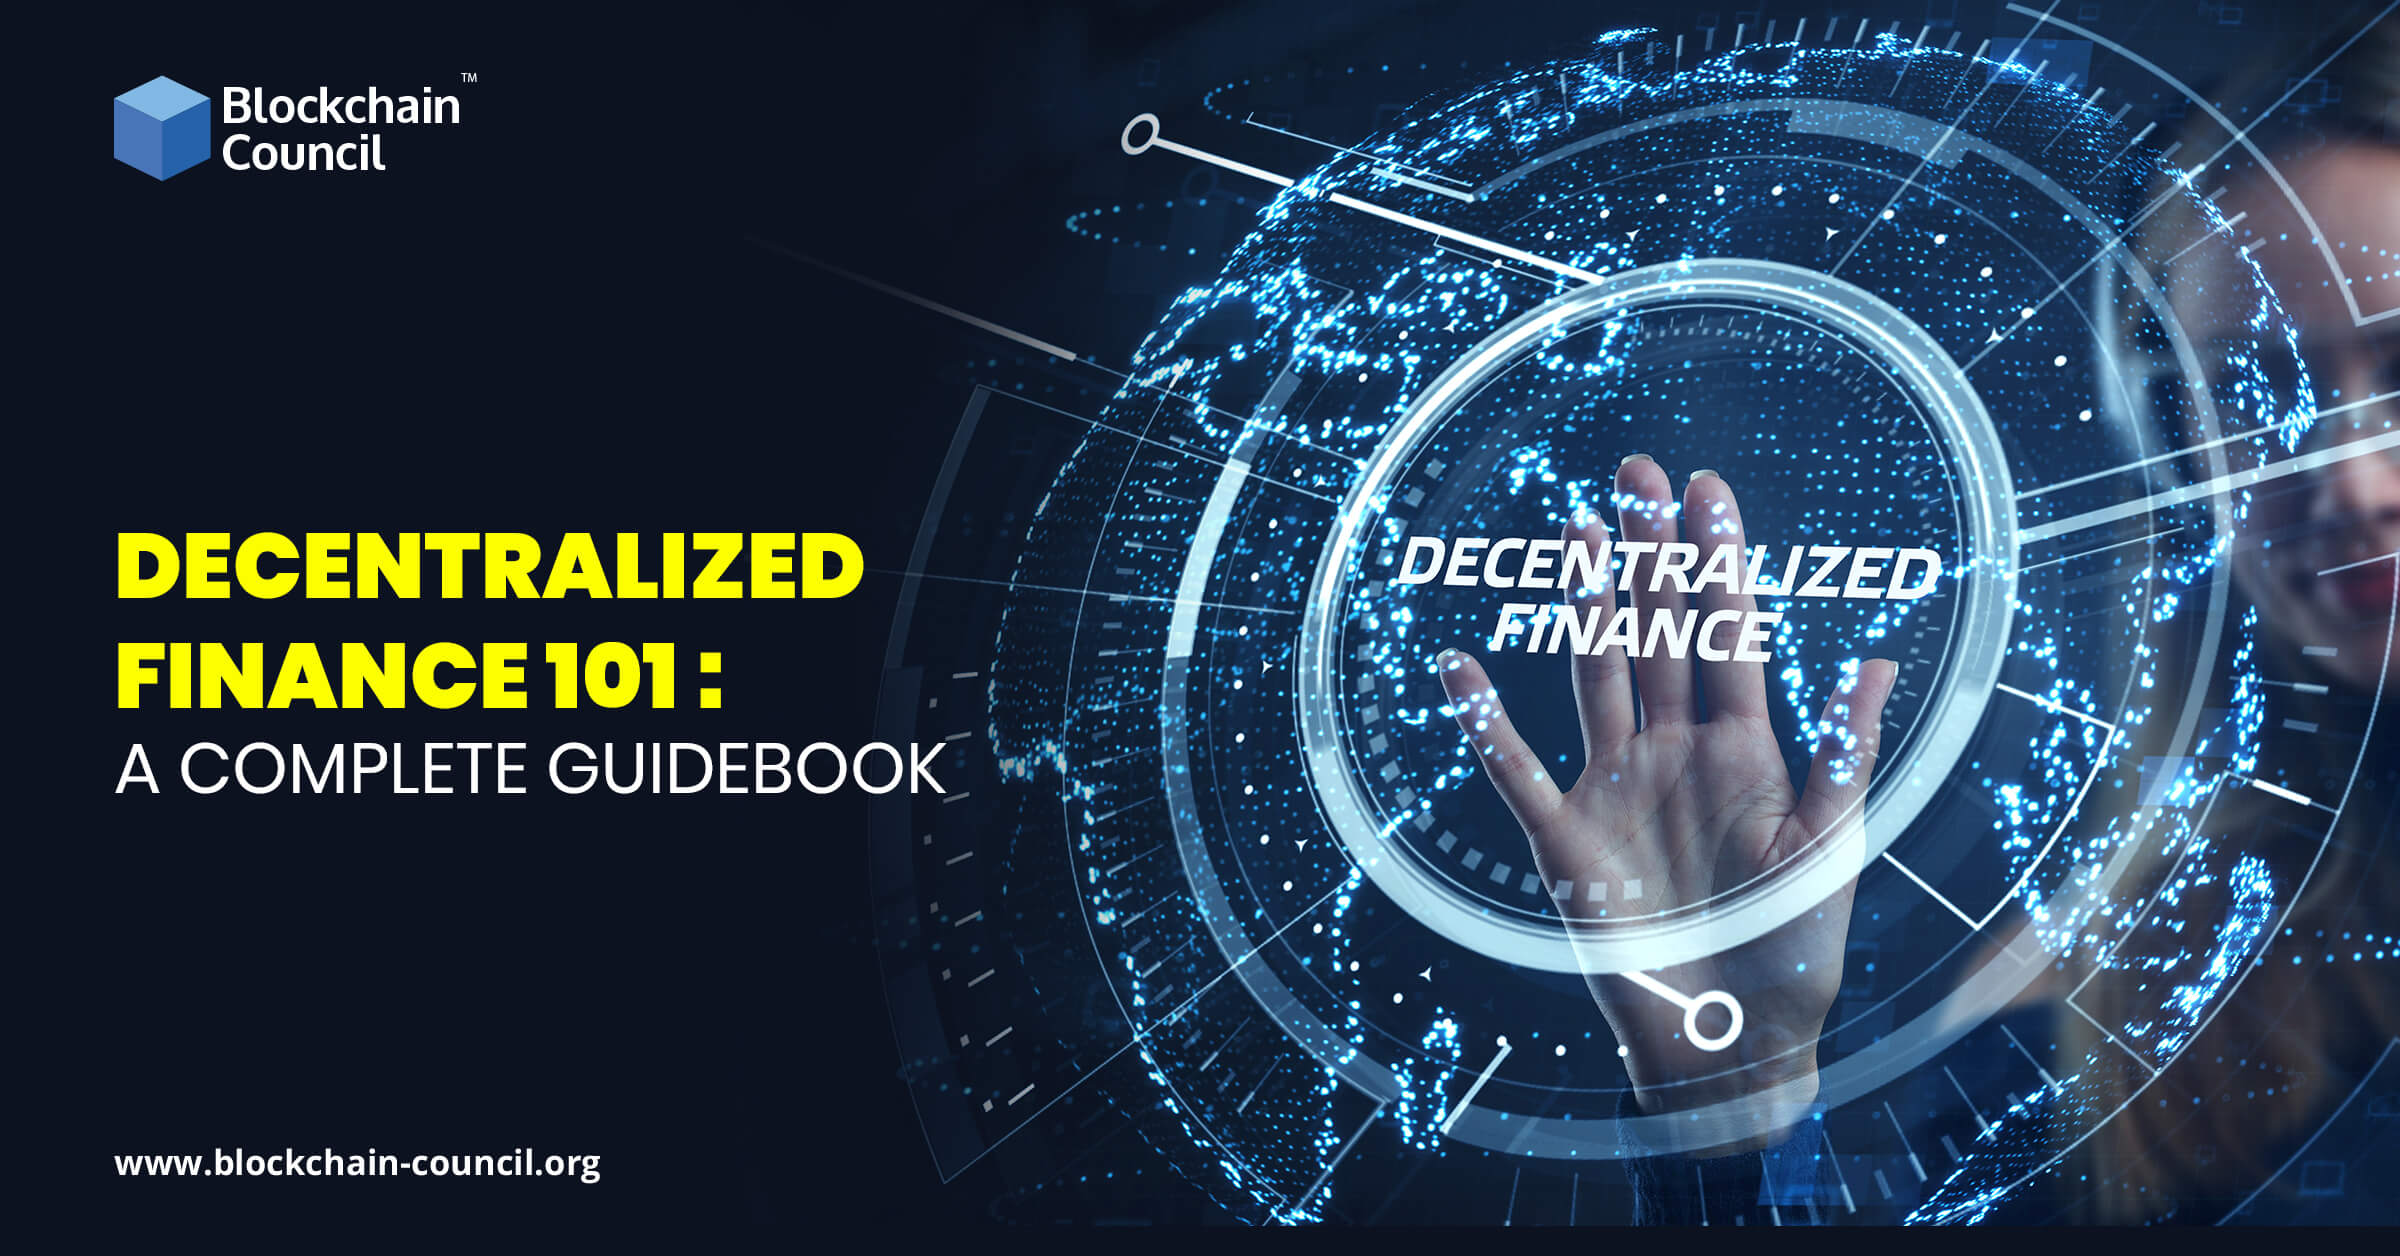 Decentralized Finance 101 A Complete Guidebook (1)